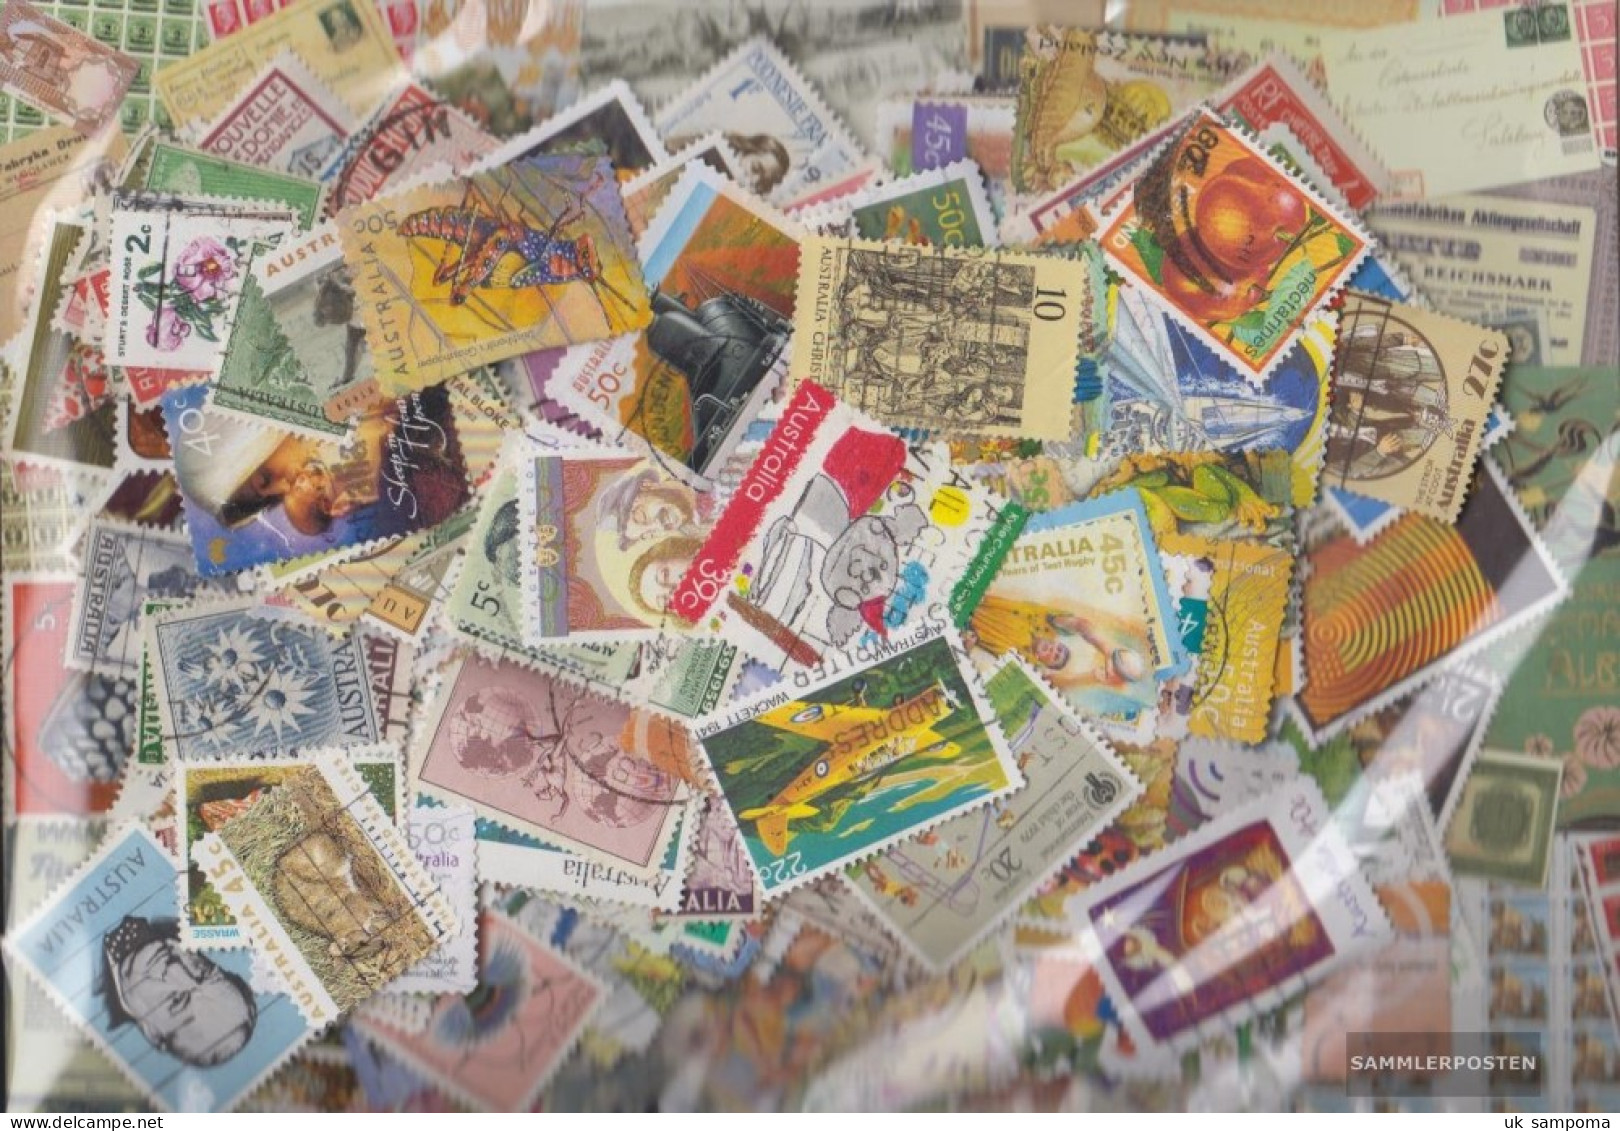 Australia 1.000 Different Stamps  Oceania - Collections